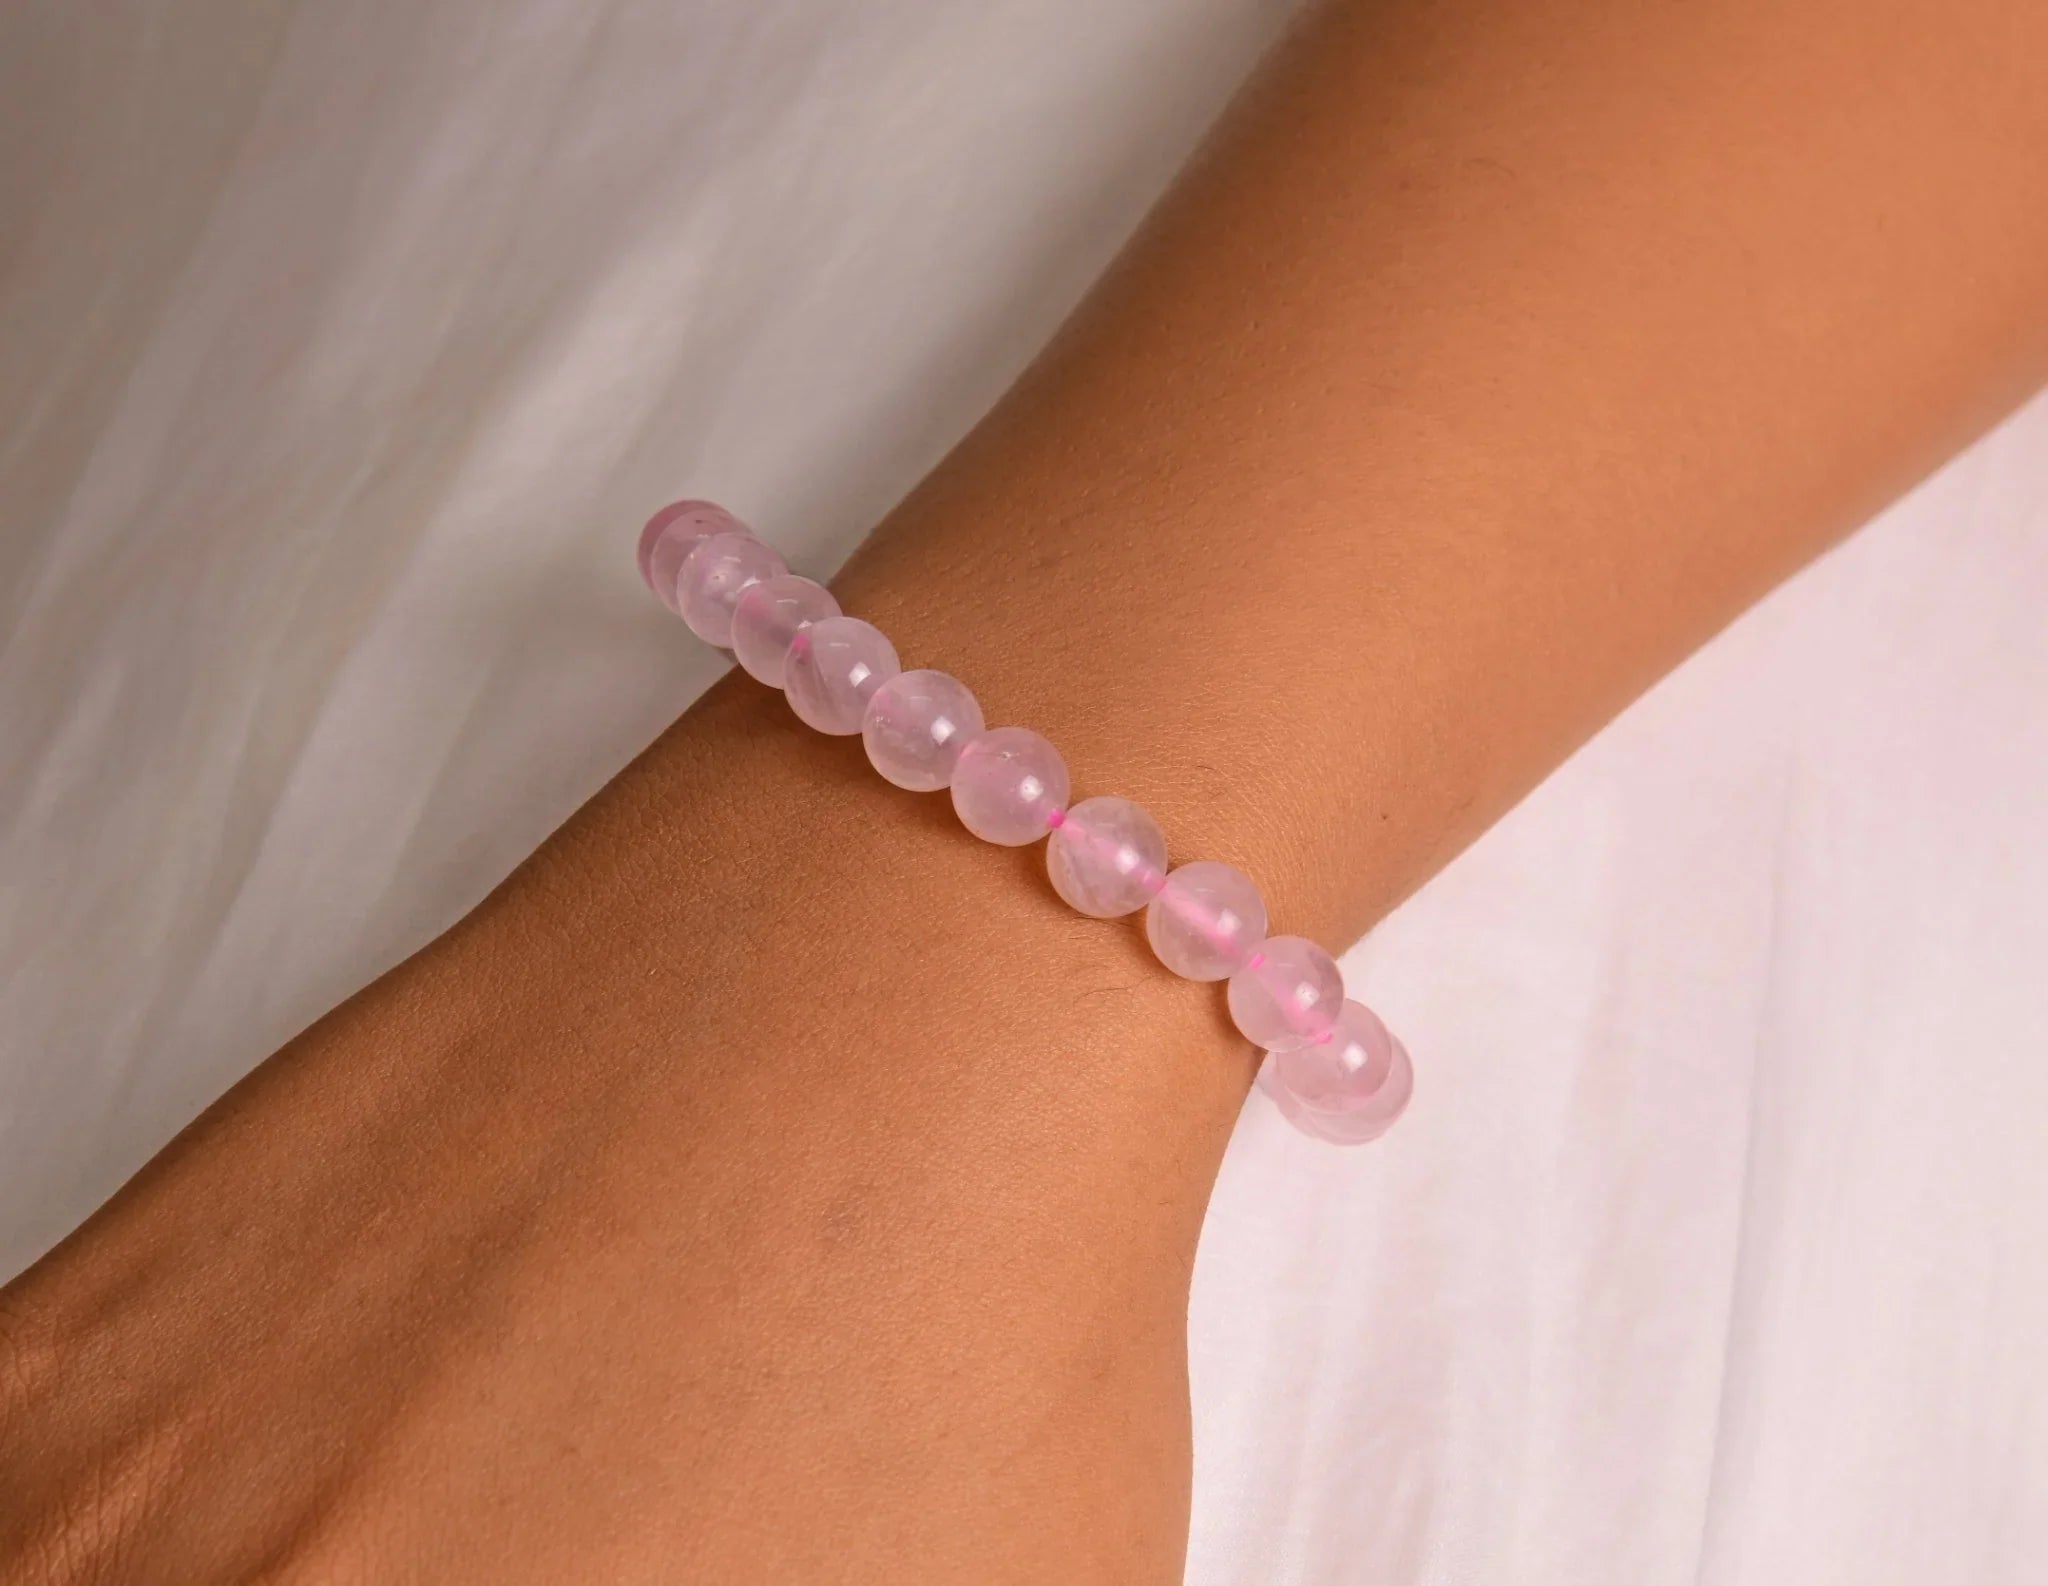 Rose Quartz Jewelry: Meaning, Benefits, and Healing Properties